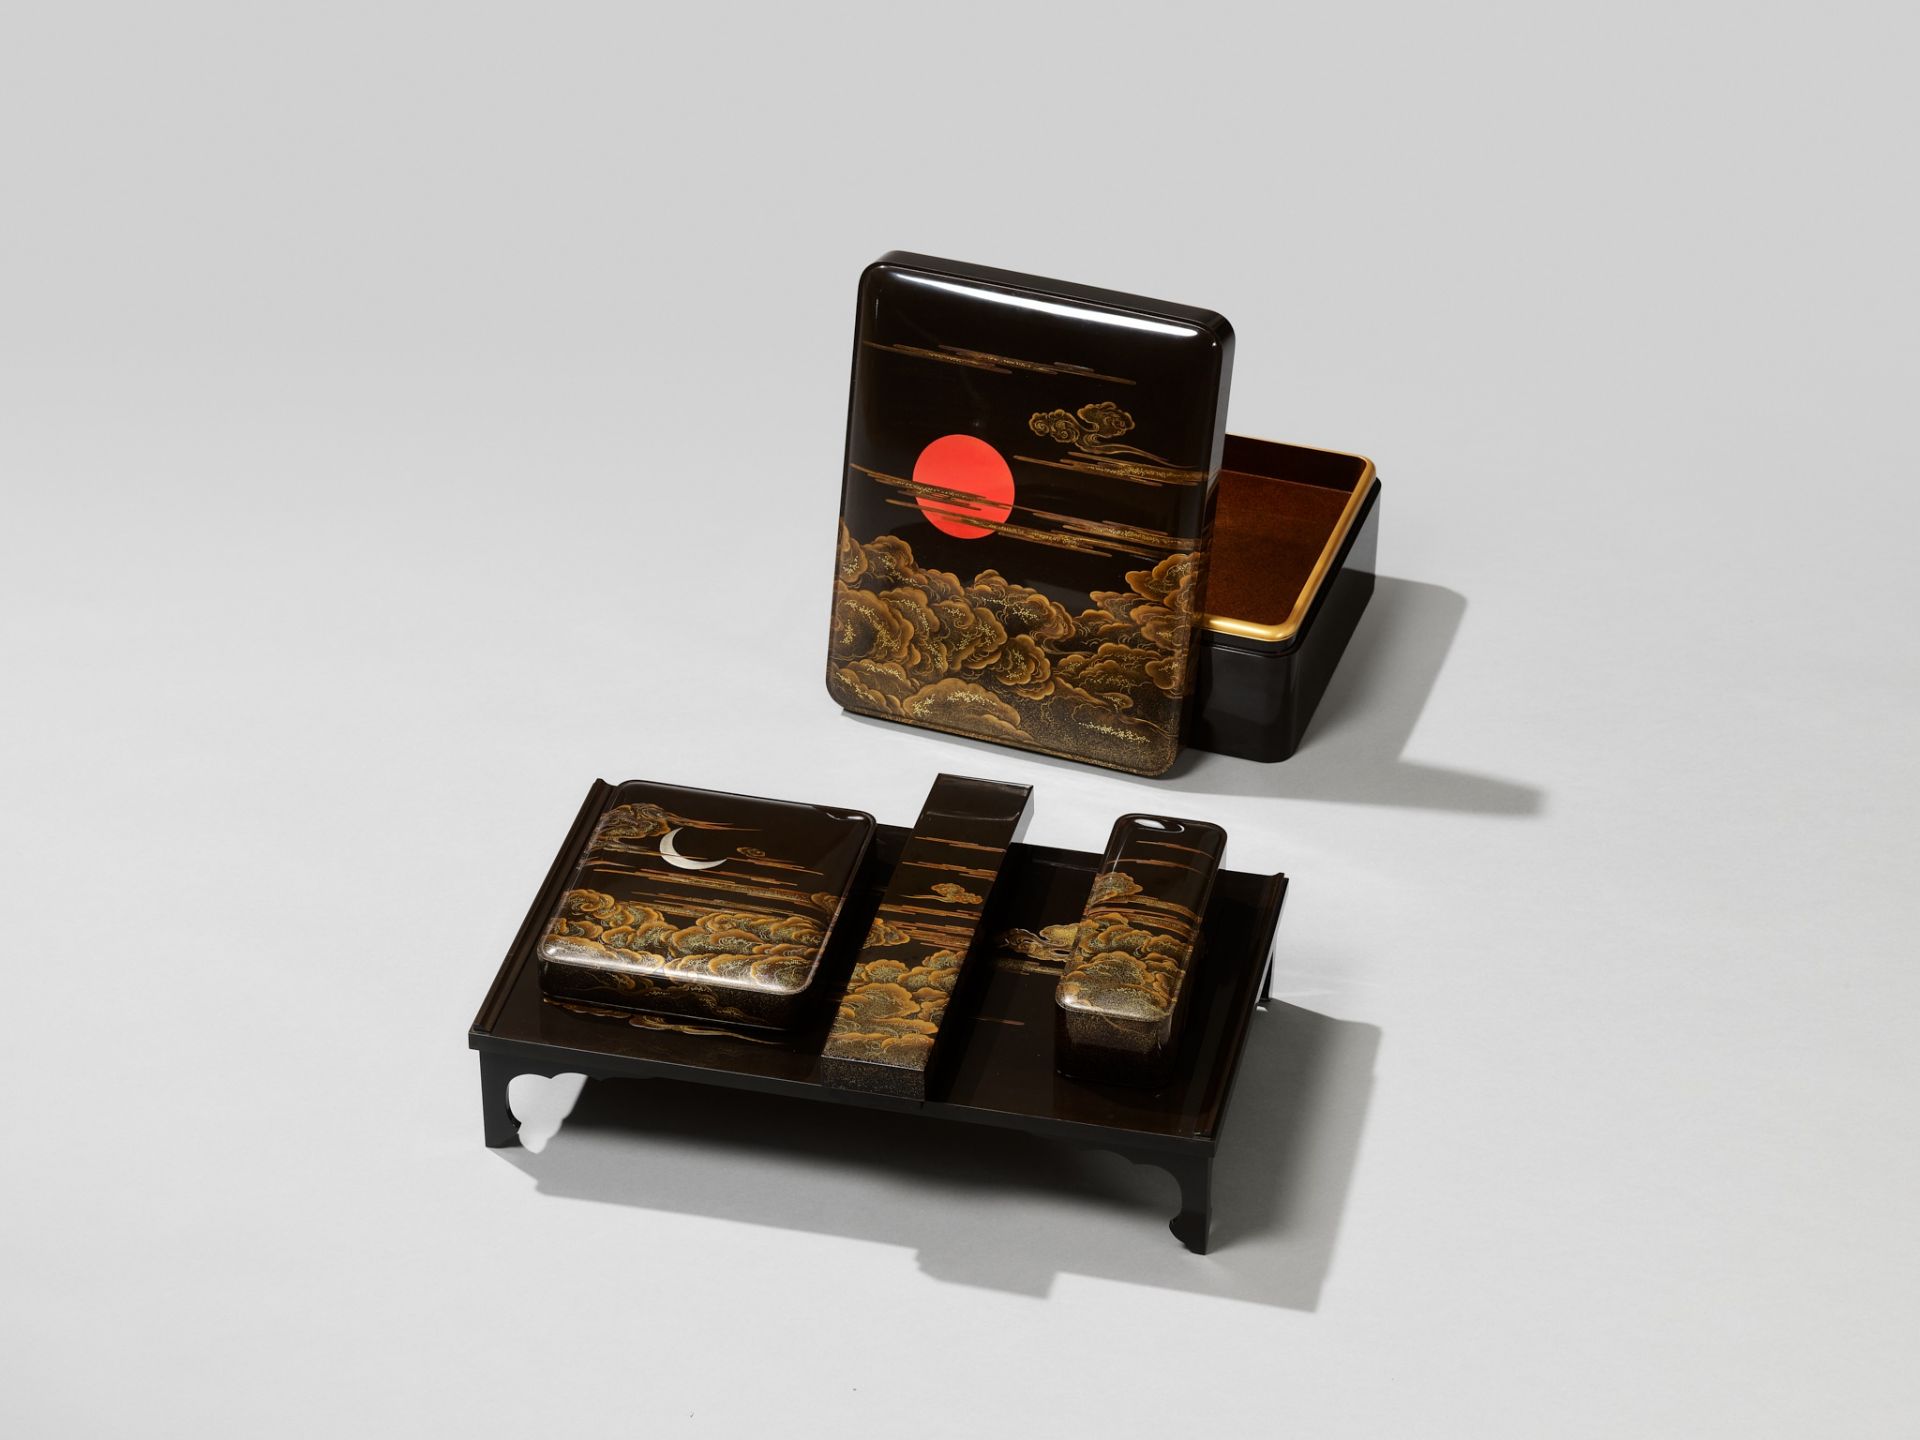 A MAGNIFICENT LACQUER WRITING SET WITH THE RISING SUN, CRESCENT MOON AND CLOUDS - Bild 7 aus 7